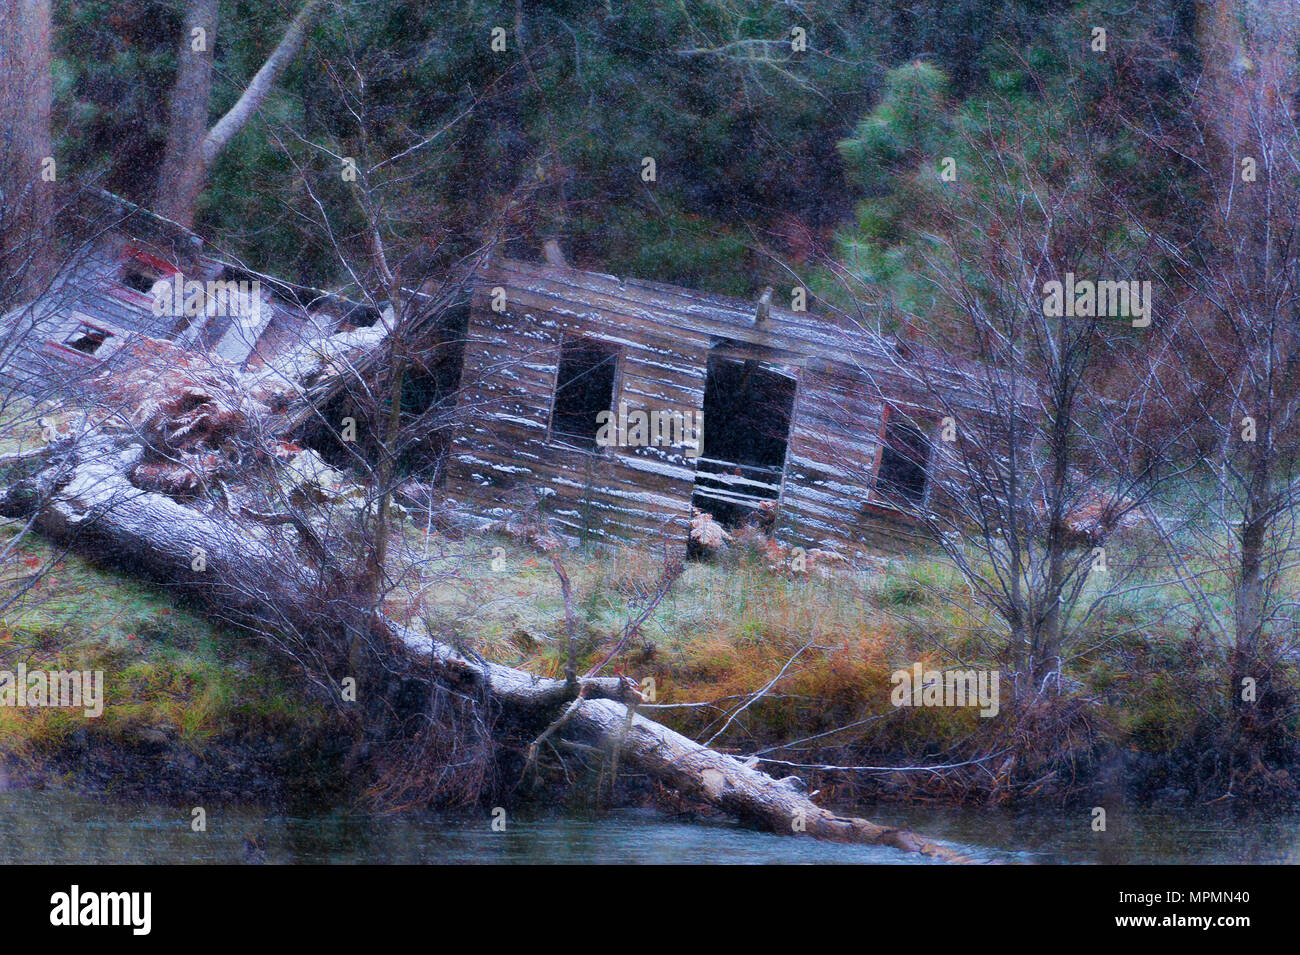 A fallen down structure on the banks of the Klickitat River, in Washington State, succumbs to another winter as the seasons first snowfall arrives Stock Photo